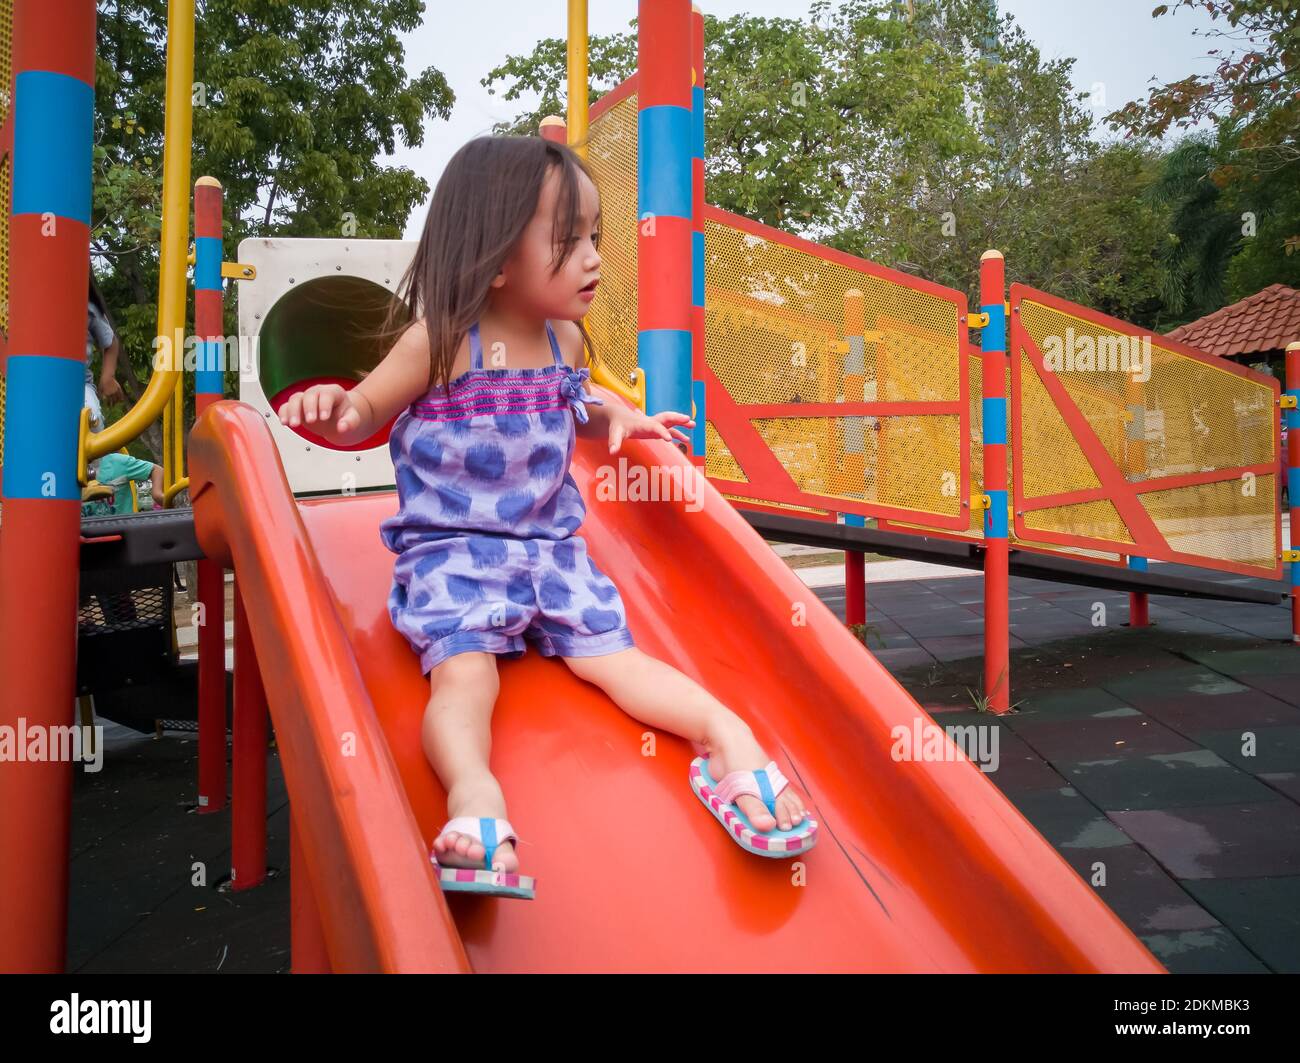 Toddler Girl Playing On A Slide At The Playground Stock Photo